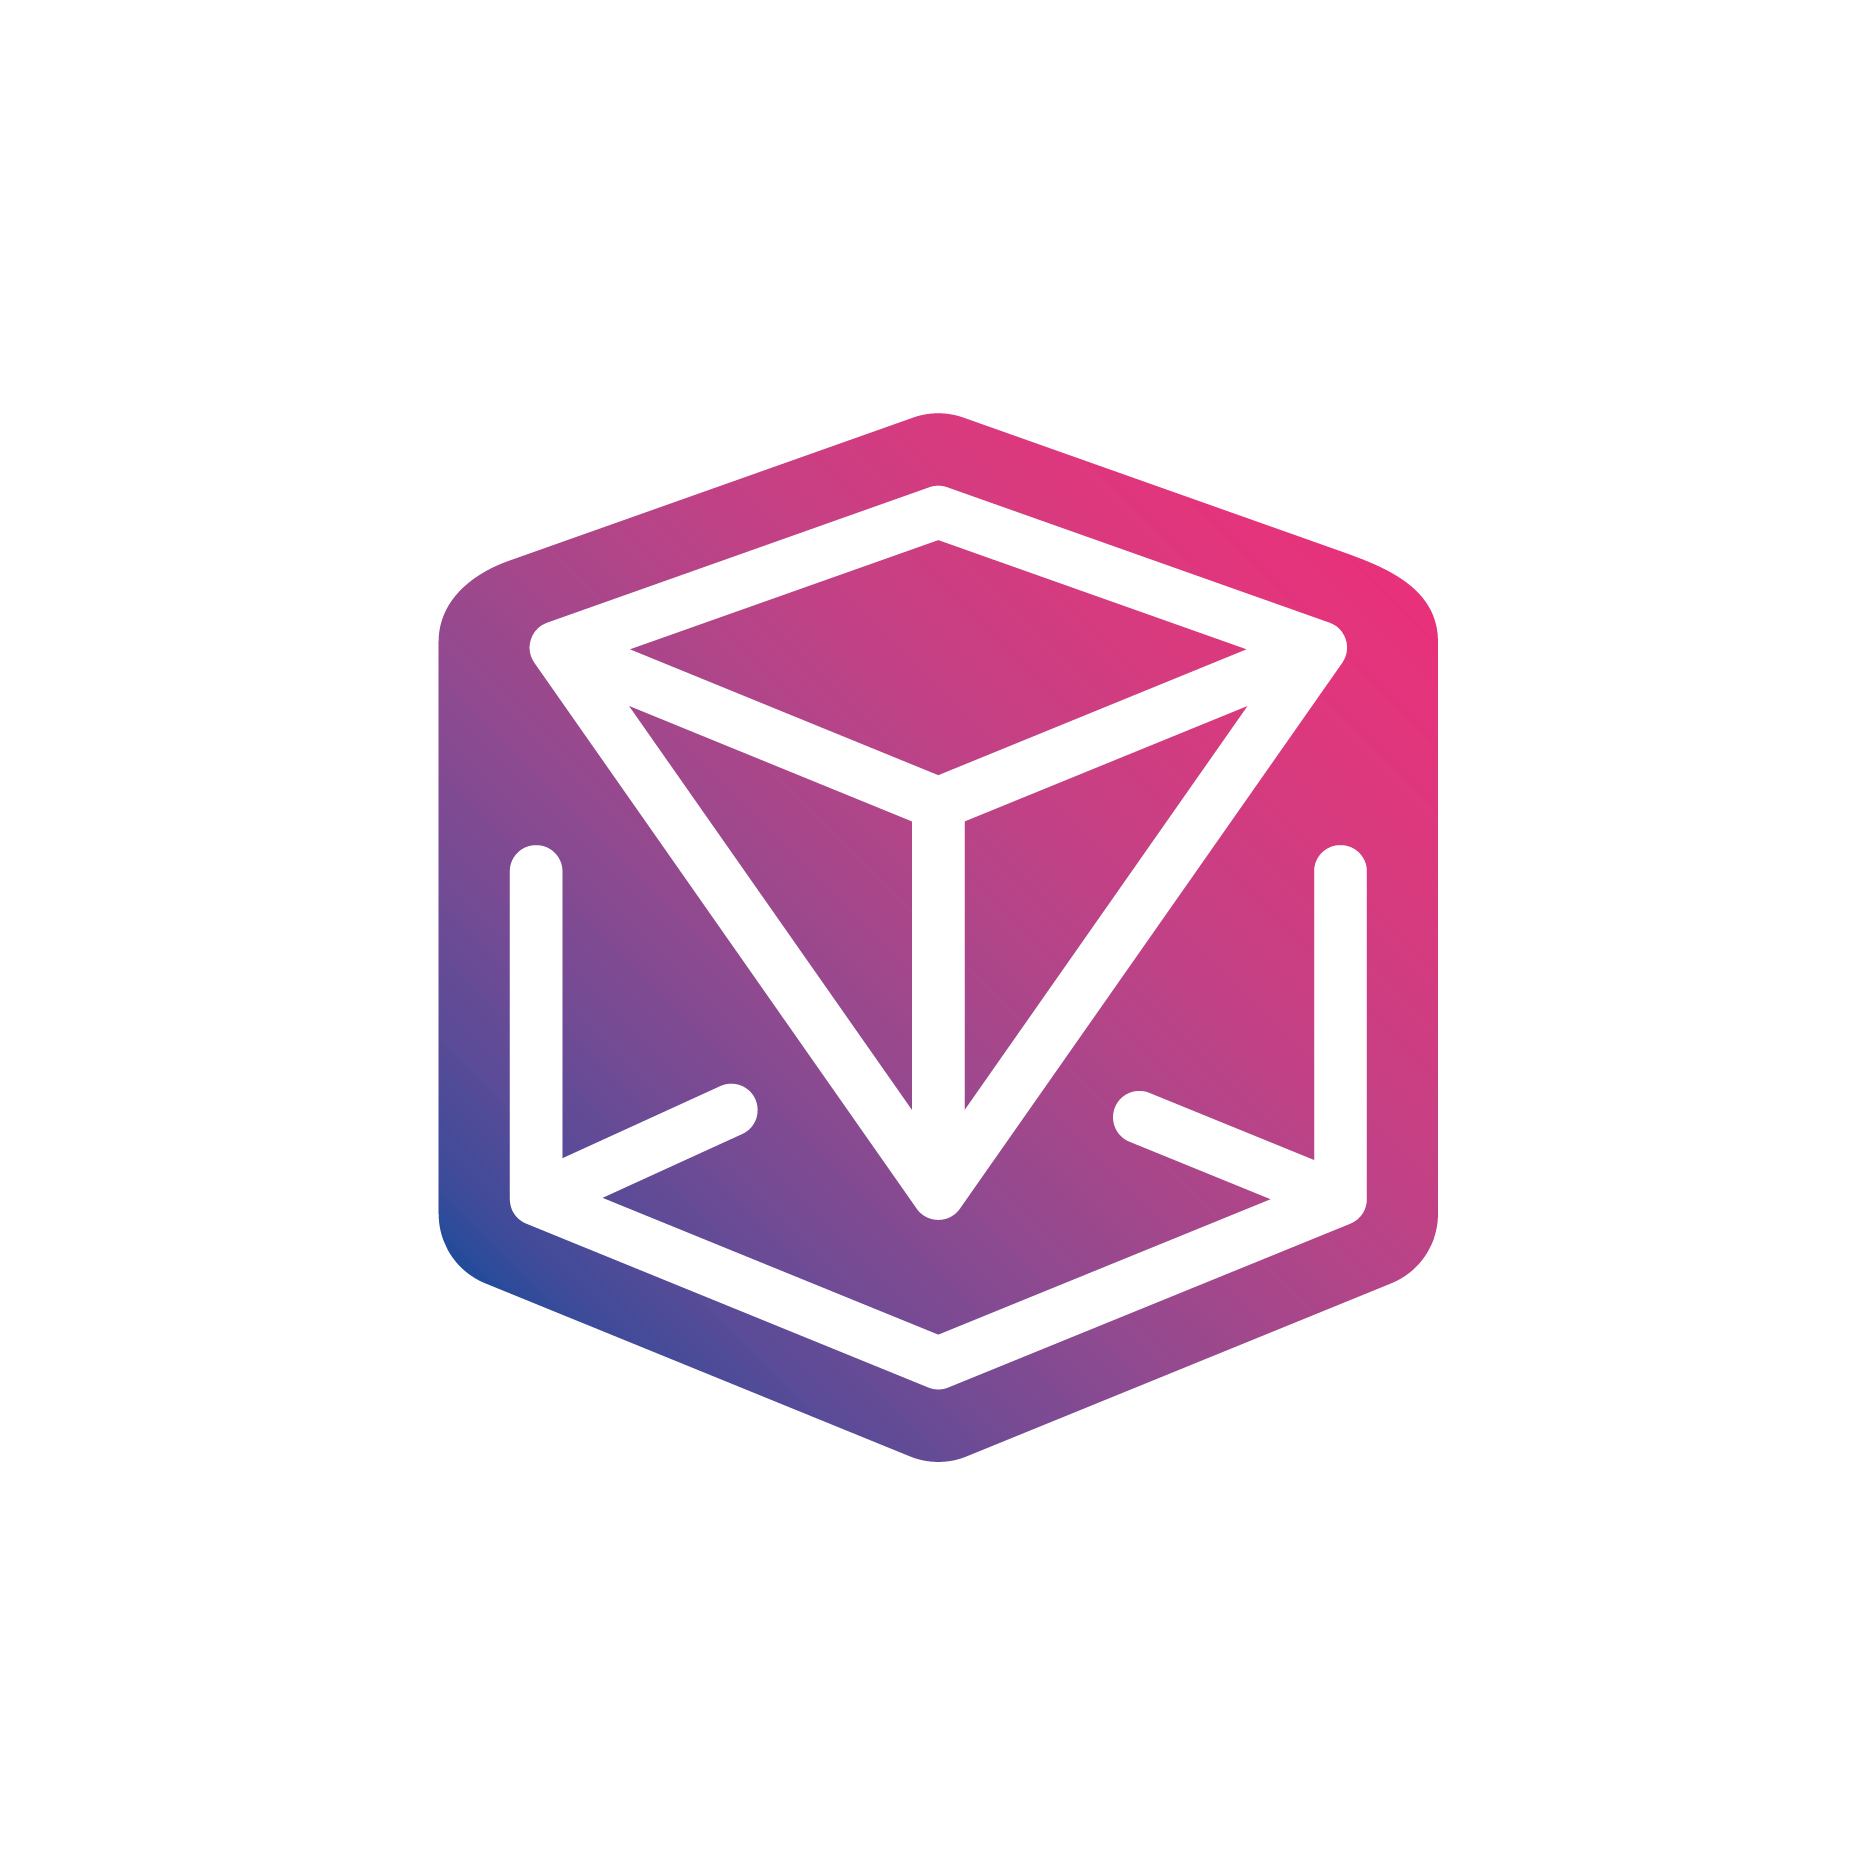 Cube + Diamond logo design by logo designer Jil for your inspiration and for the worlds largest logo competition